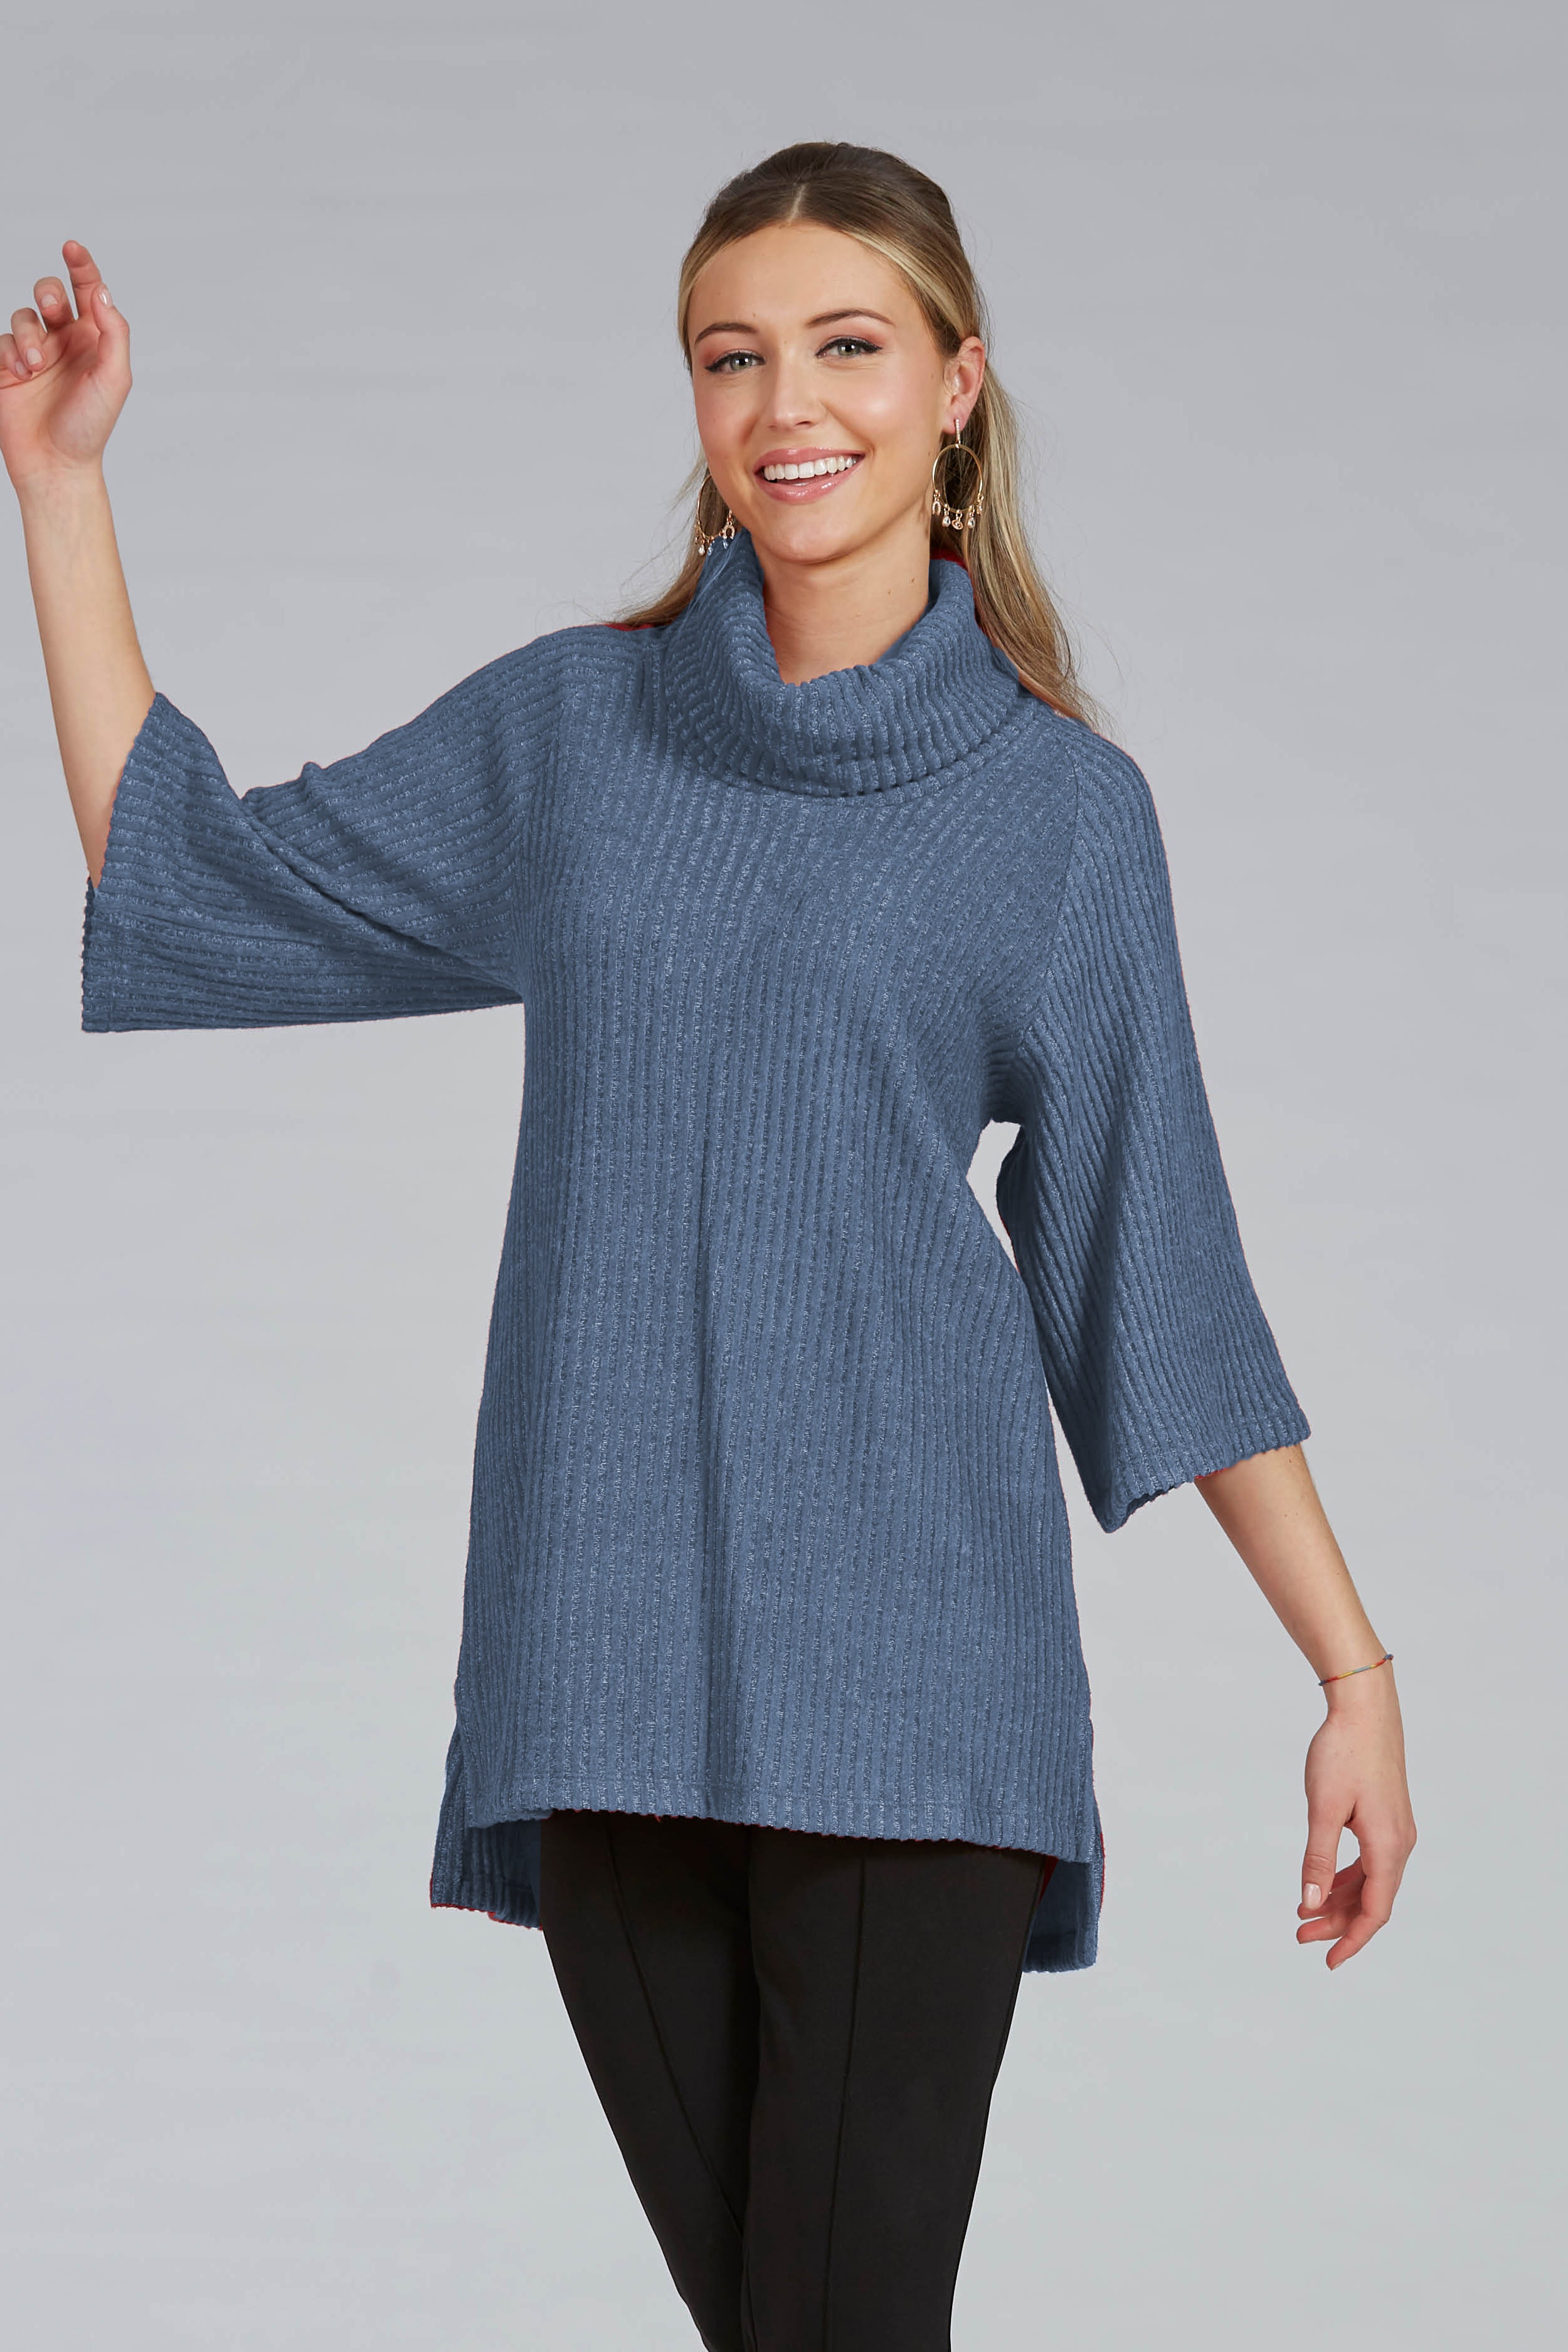 Rib Tunic by Luc Fontaine, Blue, cowl neck, wide 3/4 sleeves, hi-low hemline, side slits, sizes 4-16, made in Canada